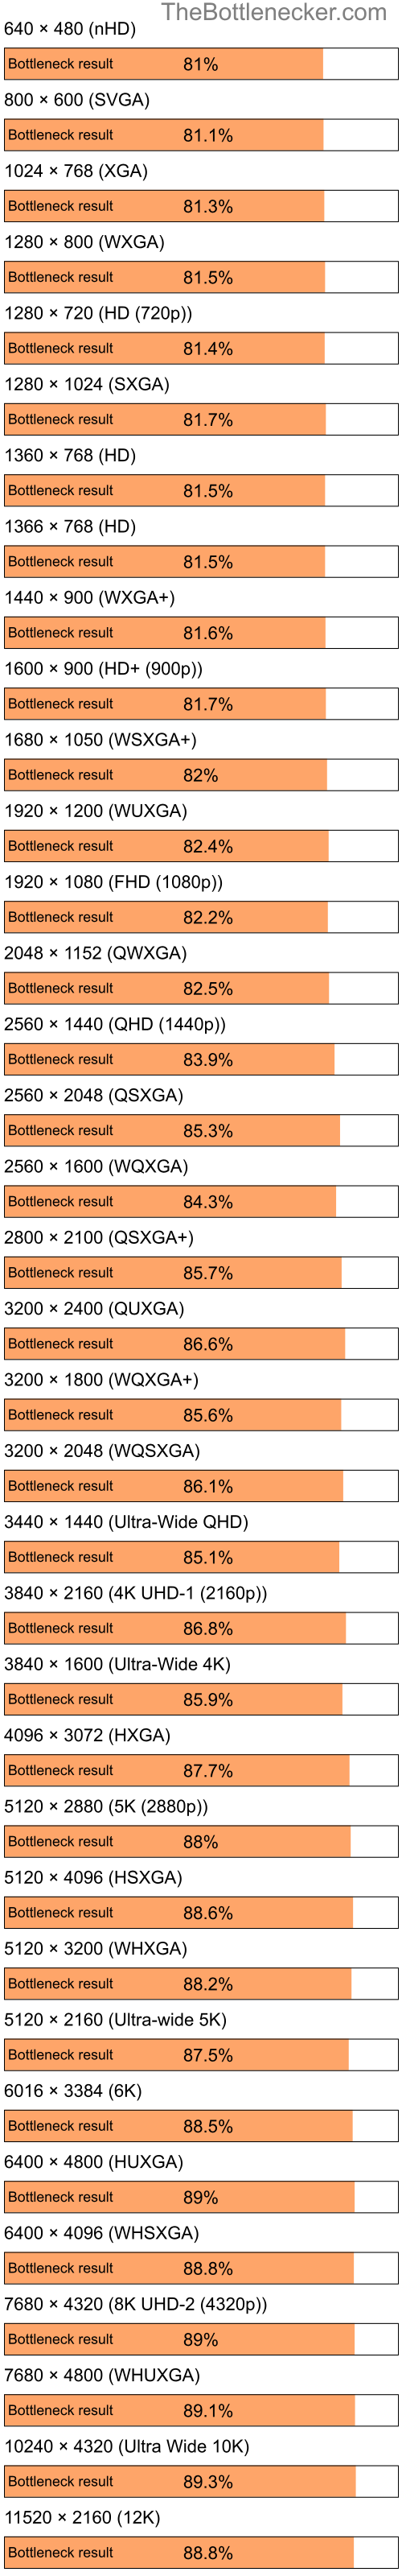 Bottleneck results by resolution for Intel Celeron and NVIDIA GeForce 7200 GS in Graphic Card Intense Tasks